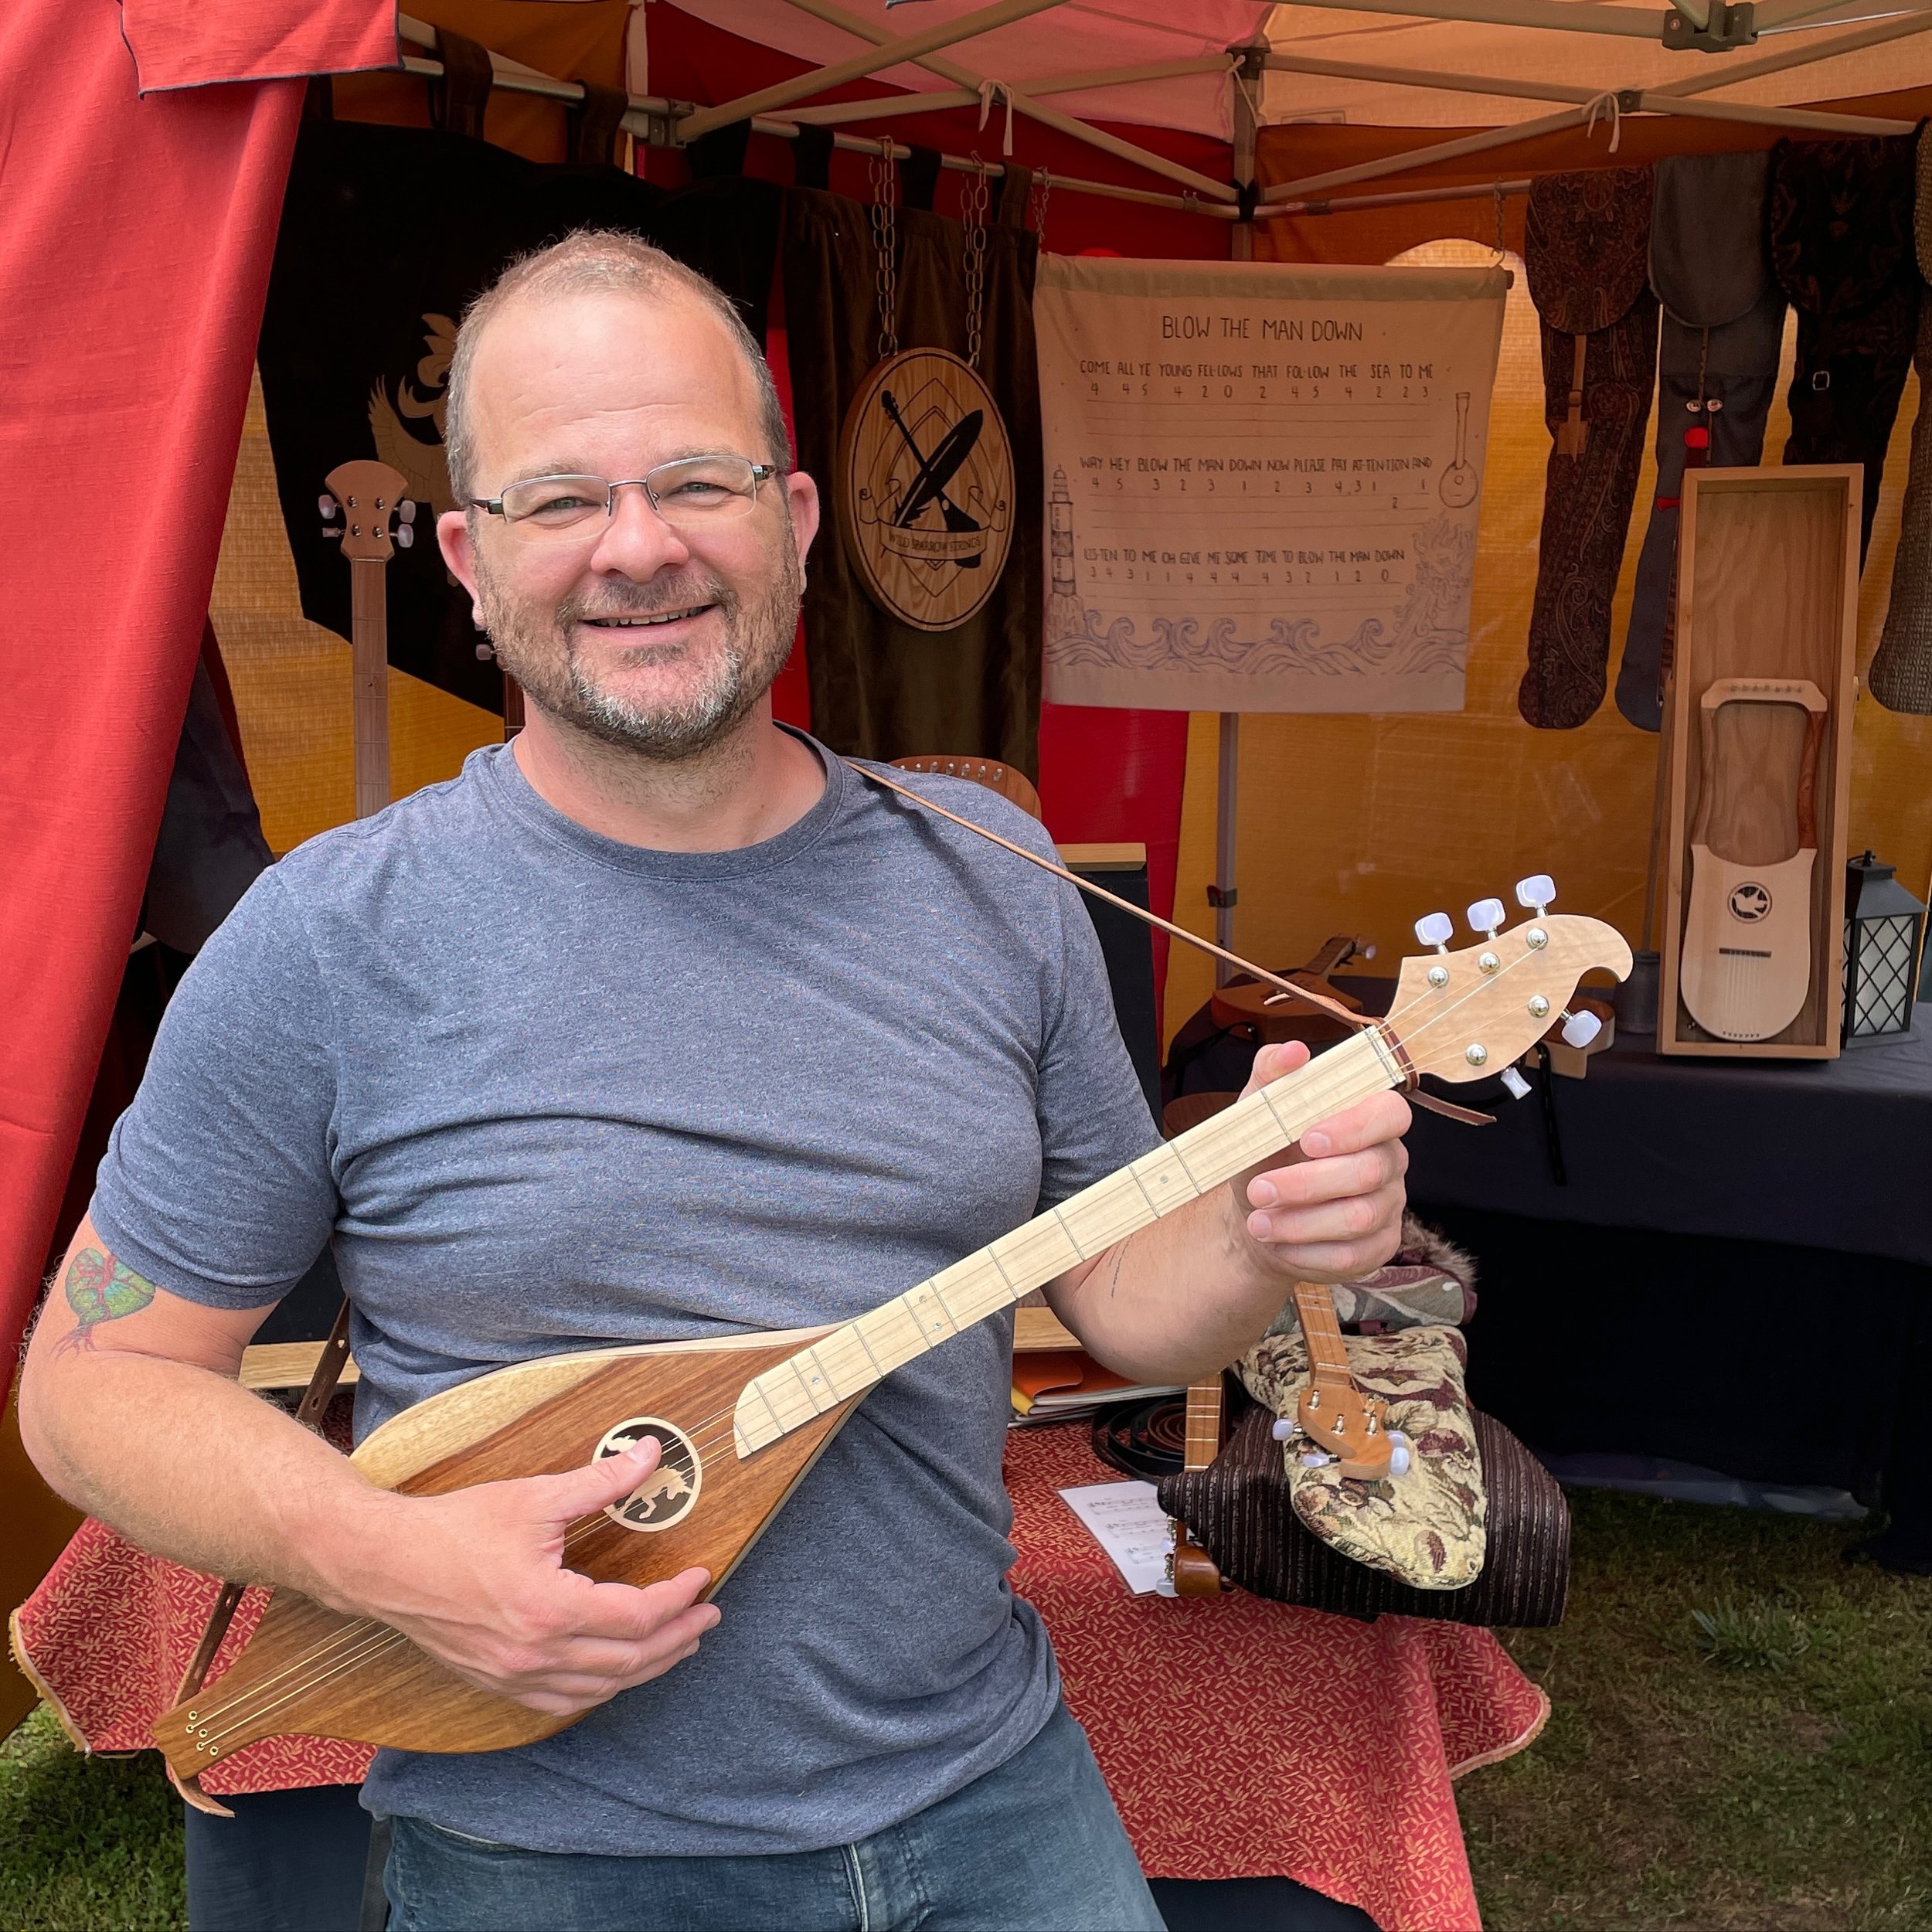 Chris came back this year to jam and teach me a song. It&rsquo;s always fun seeing yall come back to visit, especially with your Wild Sparrow instruments 😄

Chris ended up finding the Grand Alchemist No. 1 lute dulcimer and digging its mellow tone ?